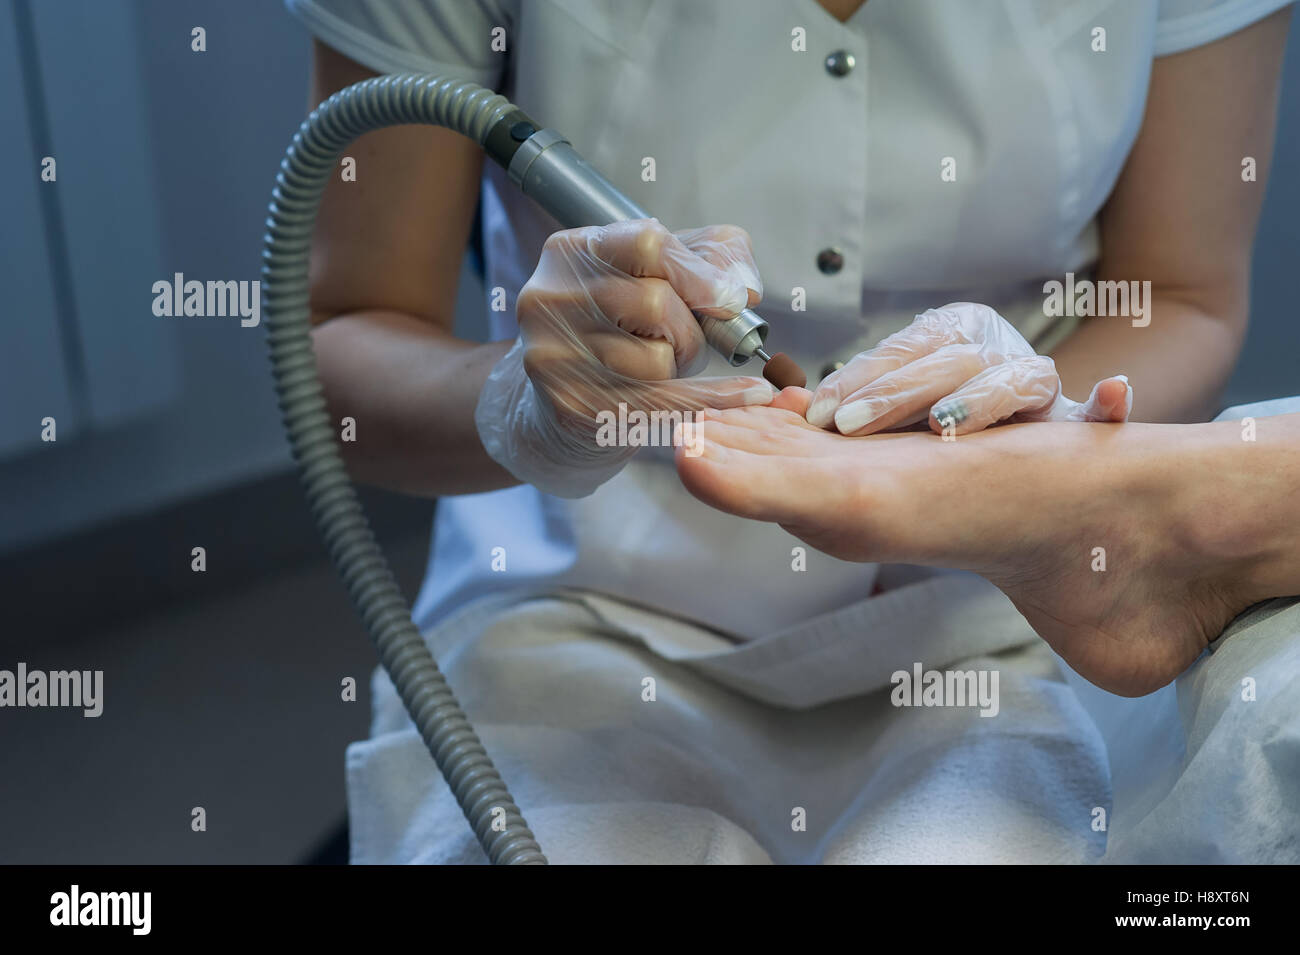 profesional nail technician sanding nails with machine Stock Photo